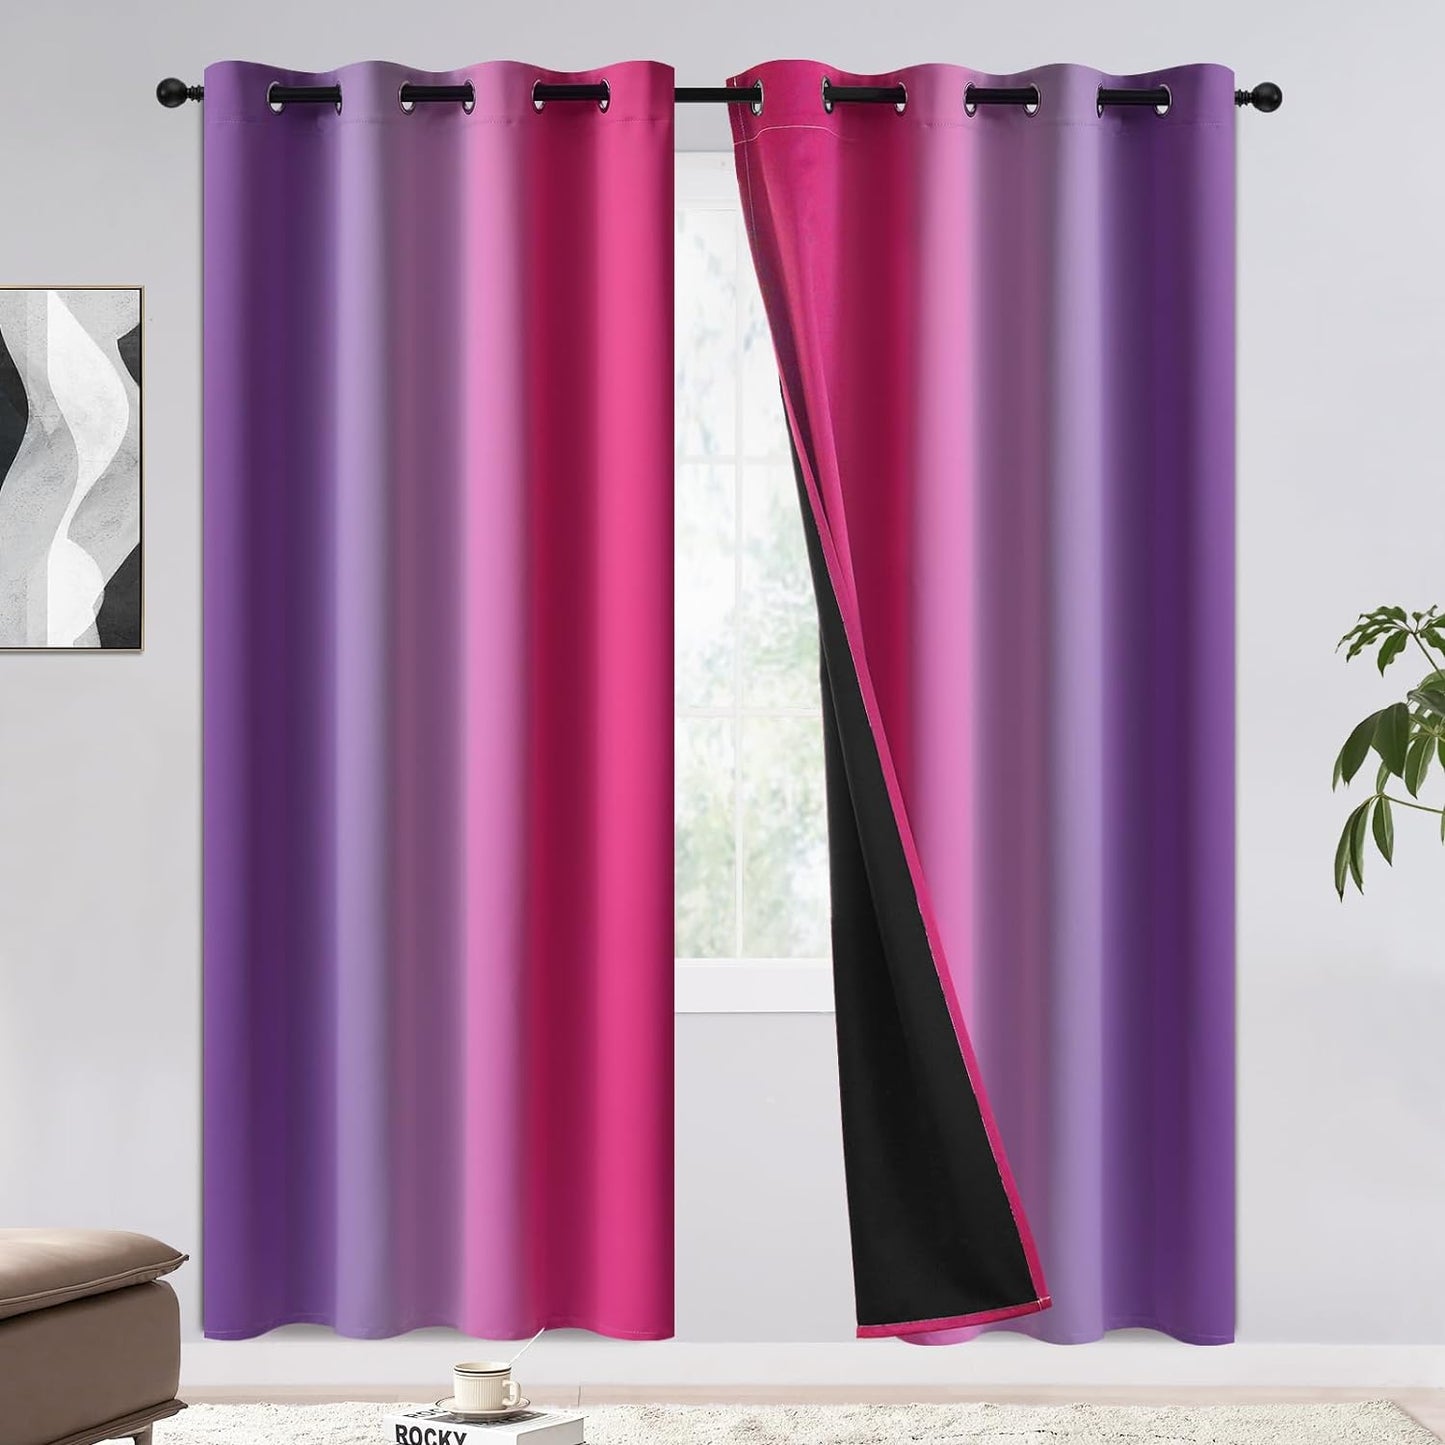 COSVIYA 100% Blackout Curtains & Drapes Ombre Purple Curtains 63 Inch Length 2 Panels,Full Room Darkening Grommet Gradient Insulated Thermal Window Curtains for Bedroom/Living Room,52X63 Inches  COSVIYA Blackout Pink And Purple 52W X 72L 